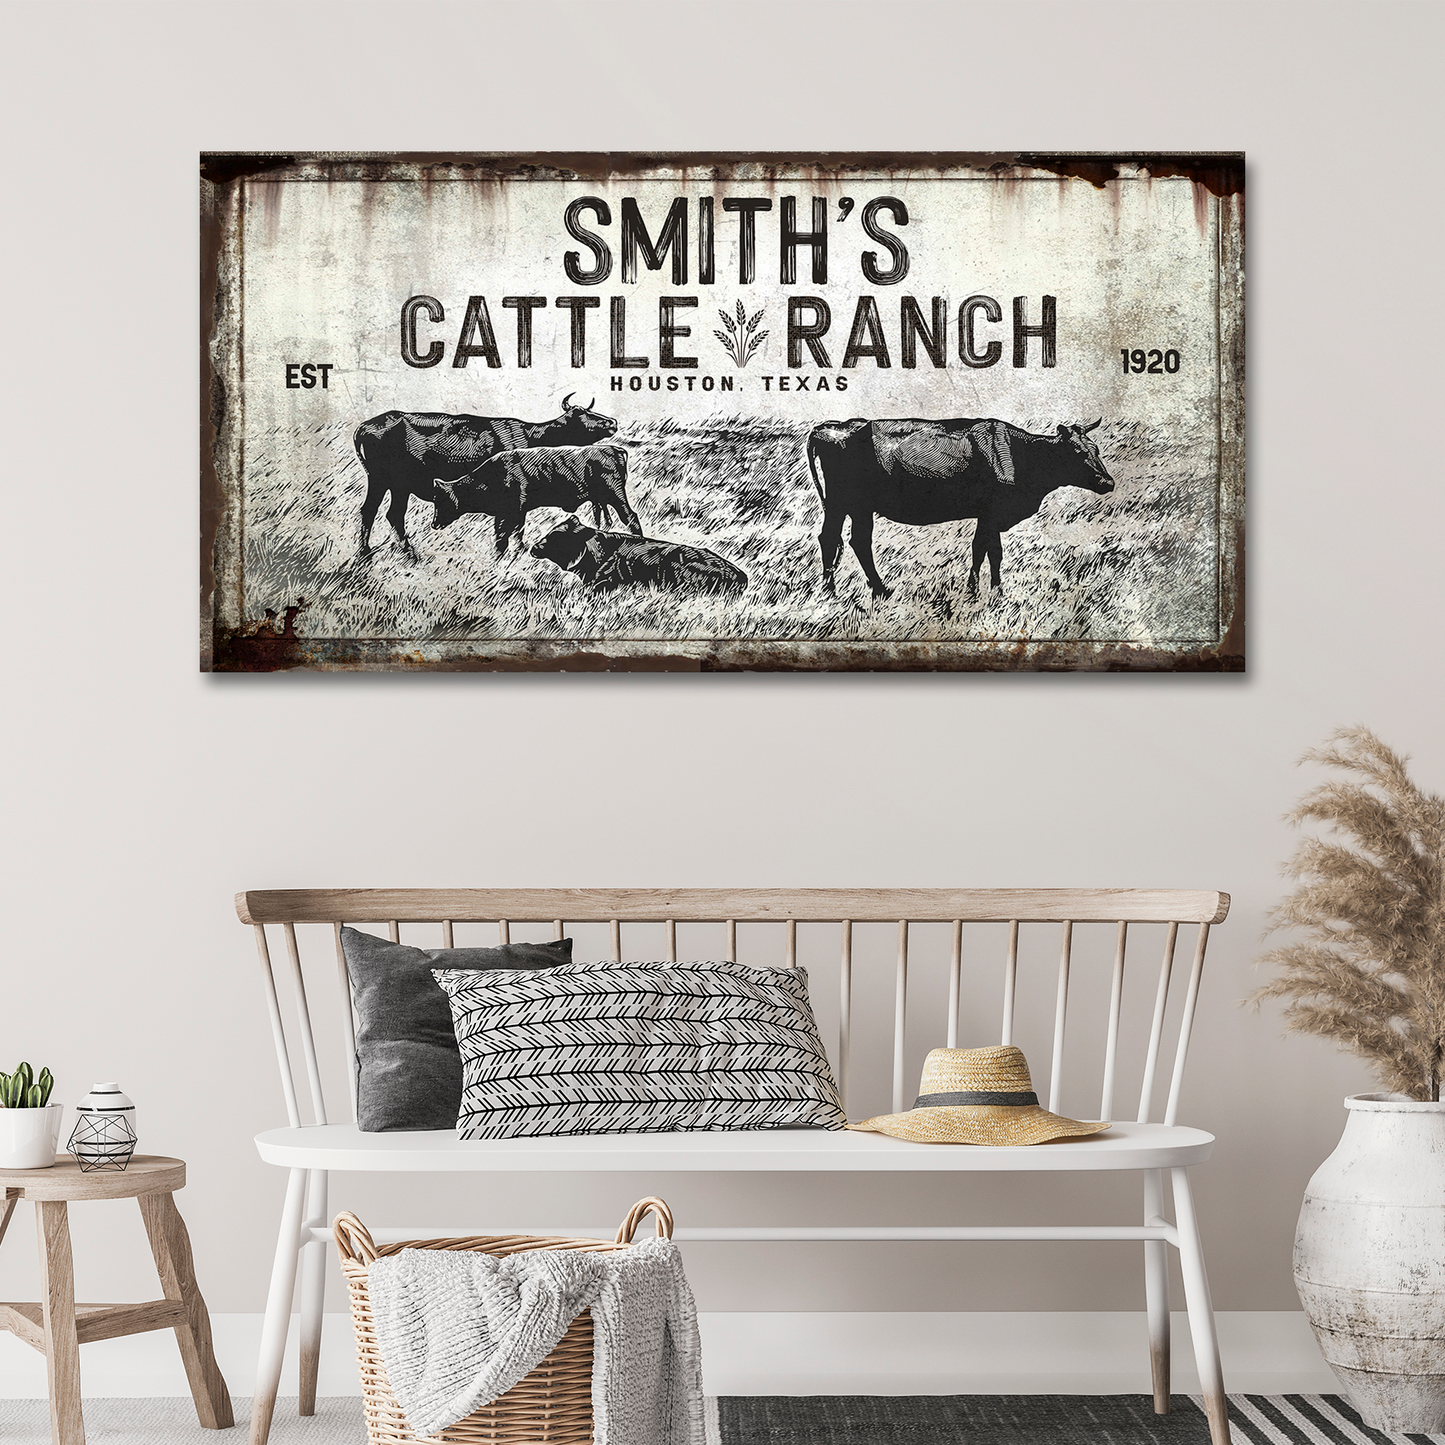 Cattle Ranch Foliage Sign - Image by Tailored Canvases